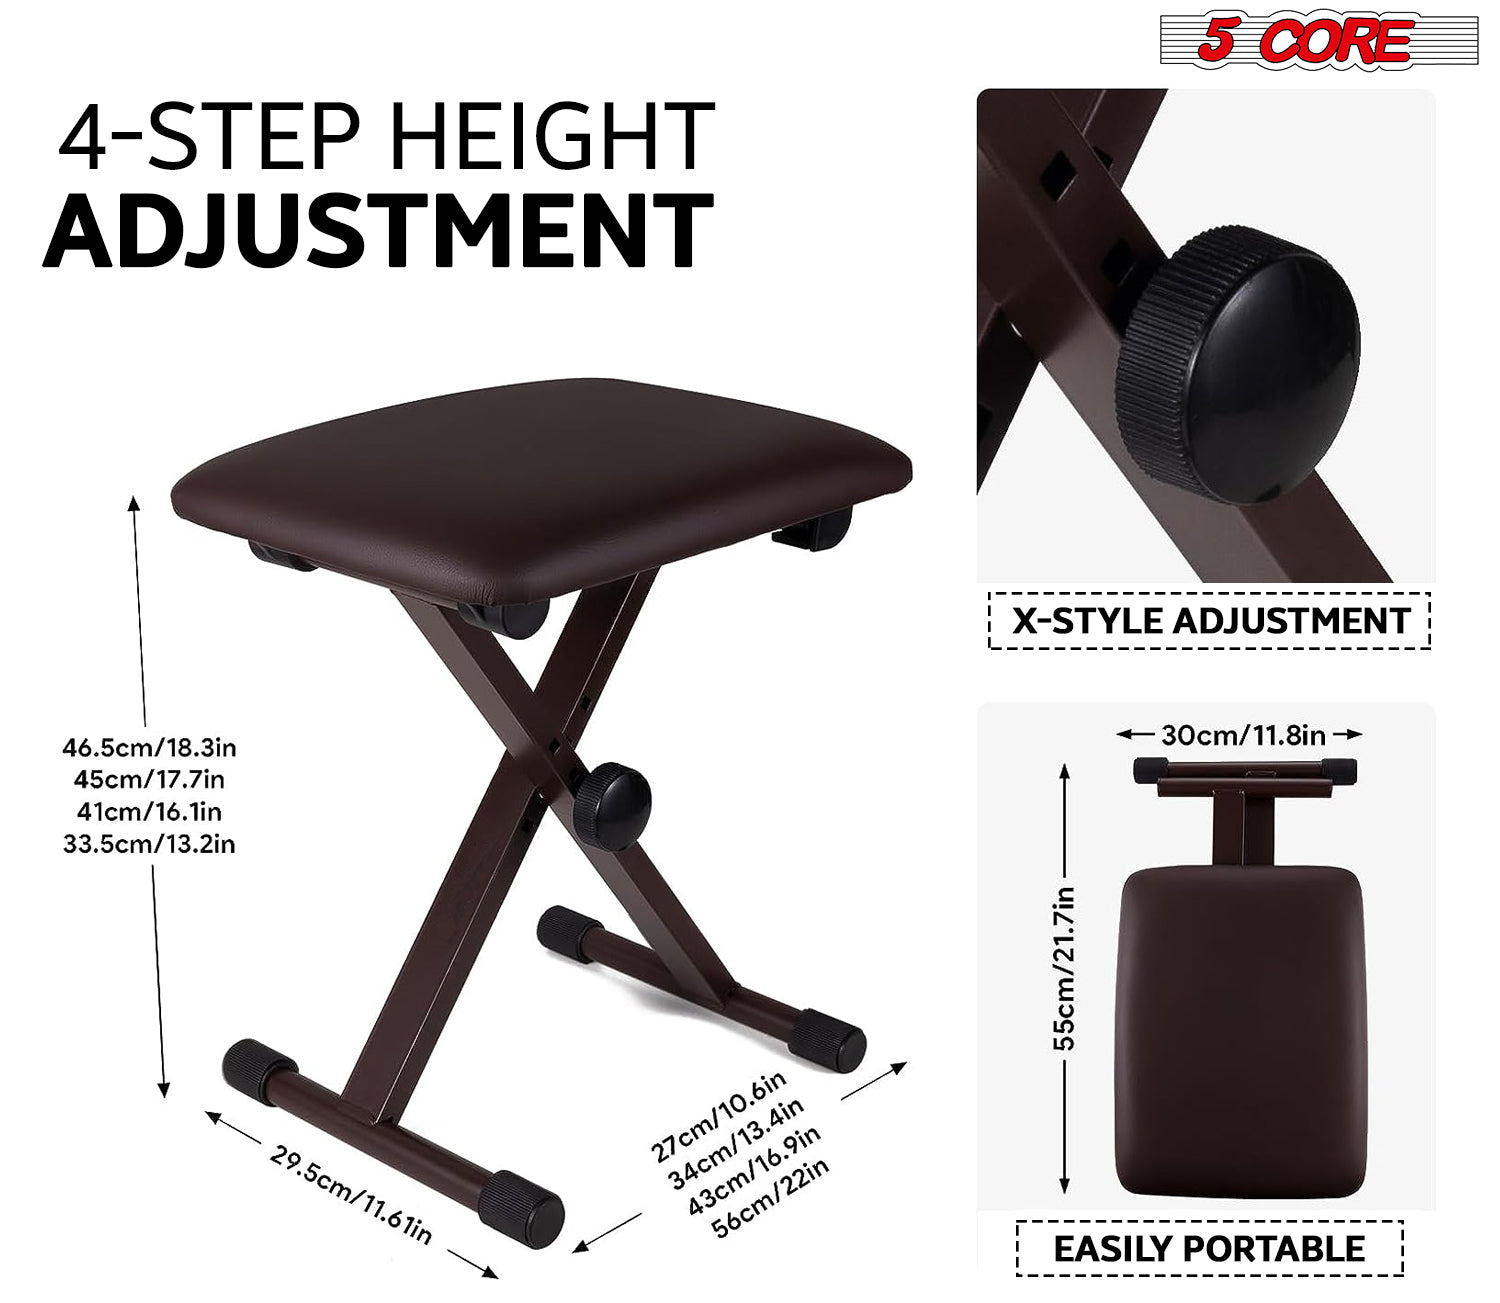 5 Core Adjustable Keyboard Bench 16.3 - 19.6 Inch 1 Piece Brown X style Bench Piano Stool Chair Thick And Padded Comfortable Guitar Stools & Seats - KBB 02 BR